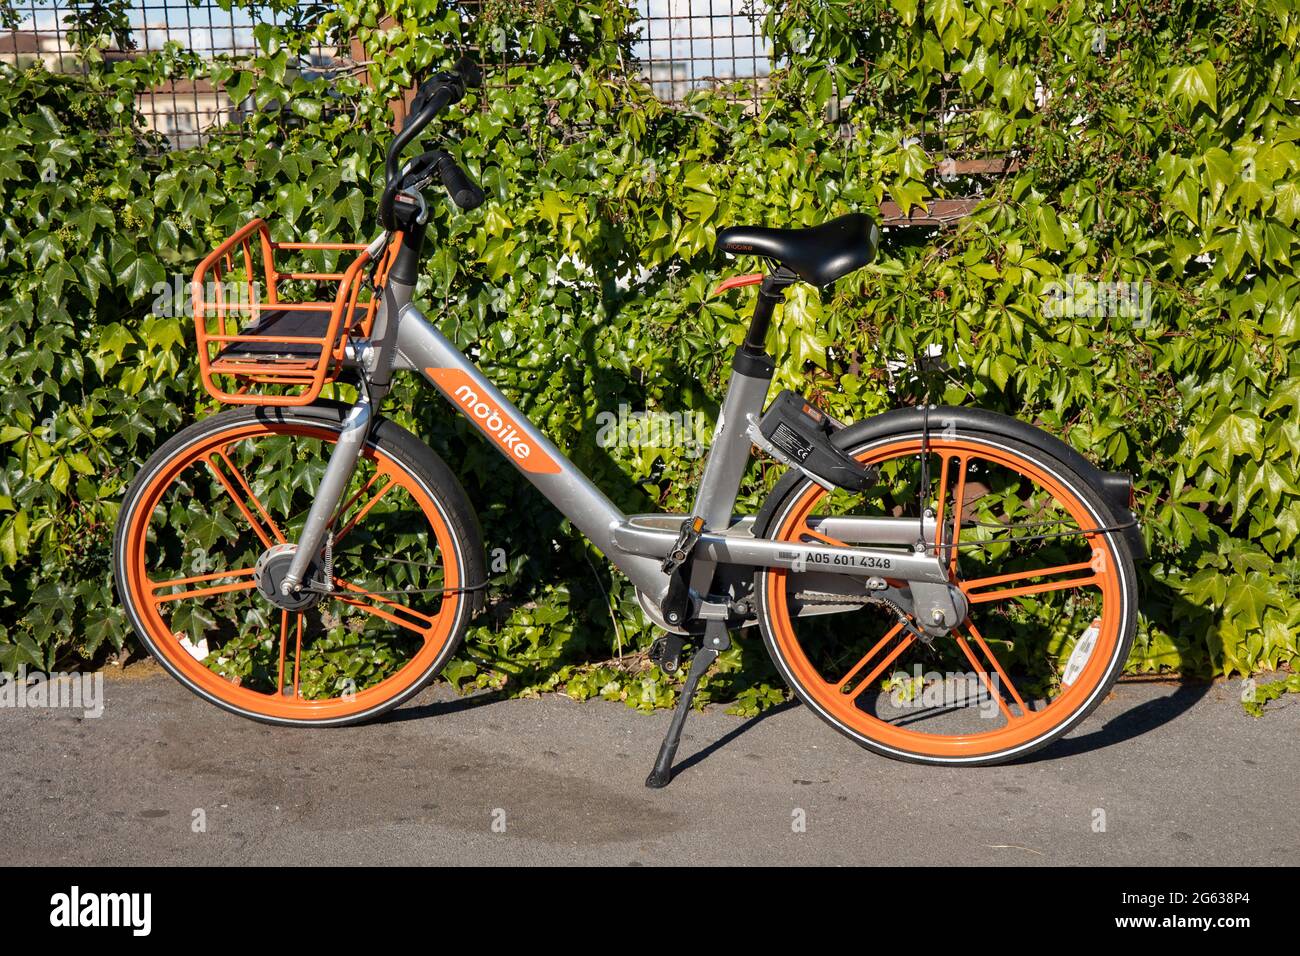 Milan, Italy, july 1 2021 -  Bicycle rental service Mobike .Orange bicycles with basket for traveling around Milan waiting cyclists. Public street tra Stock Photo